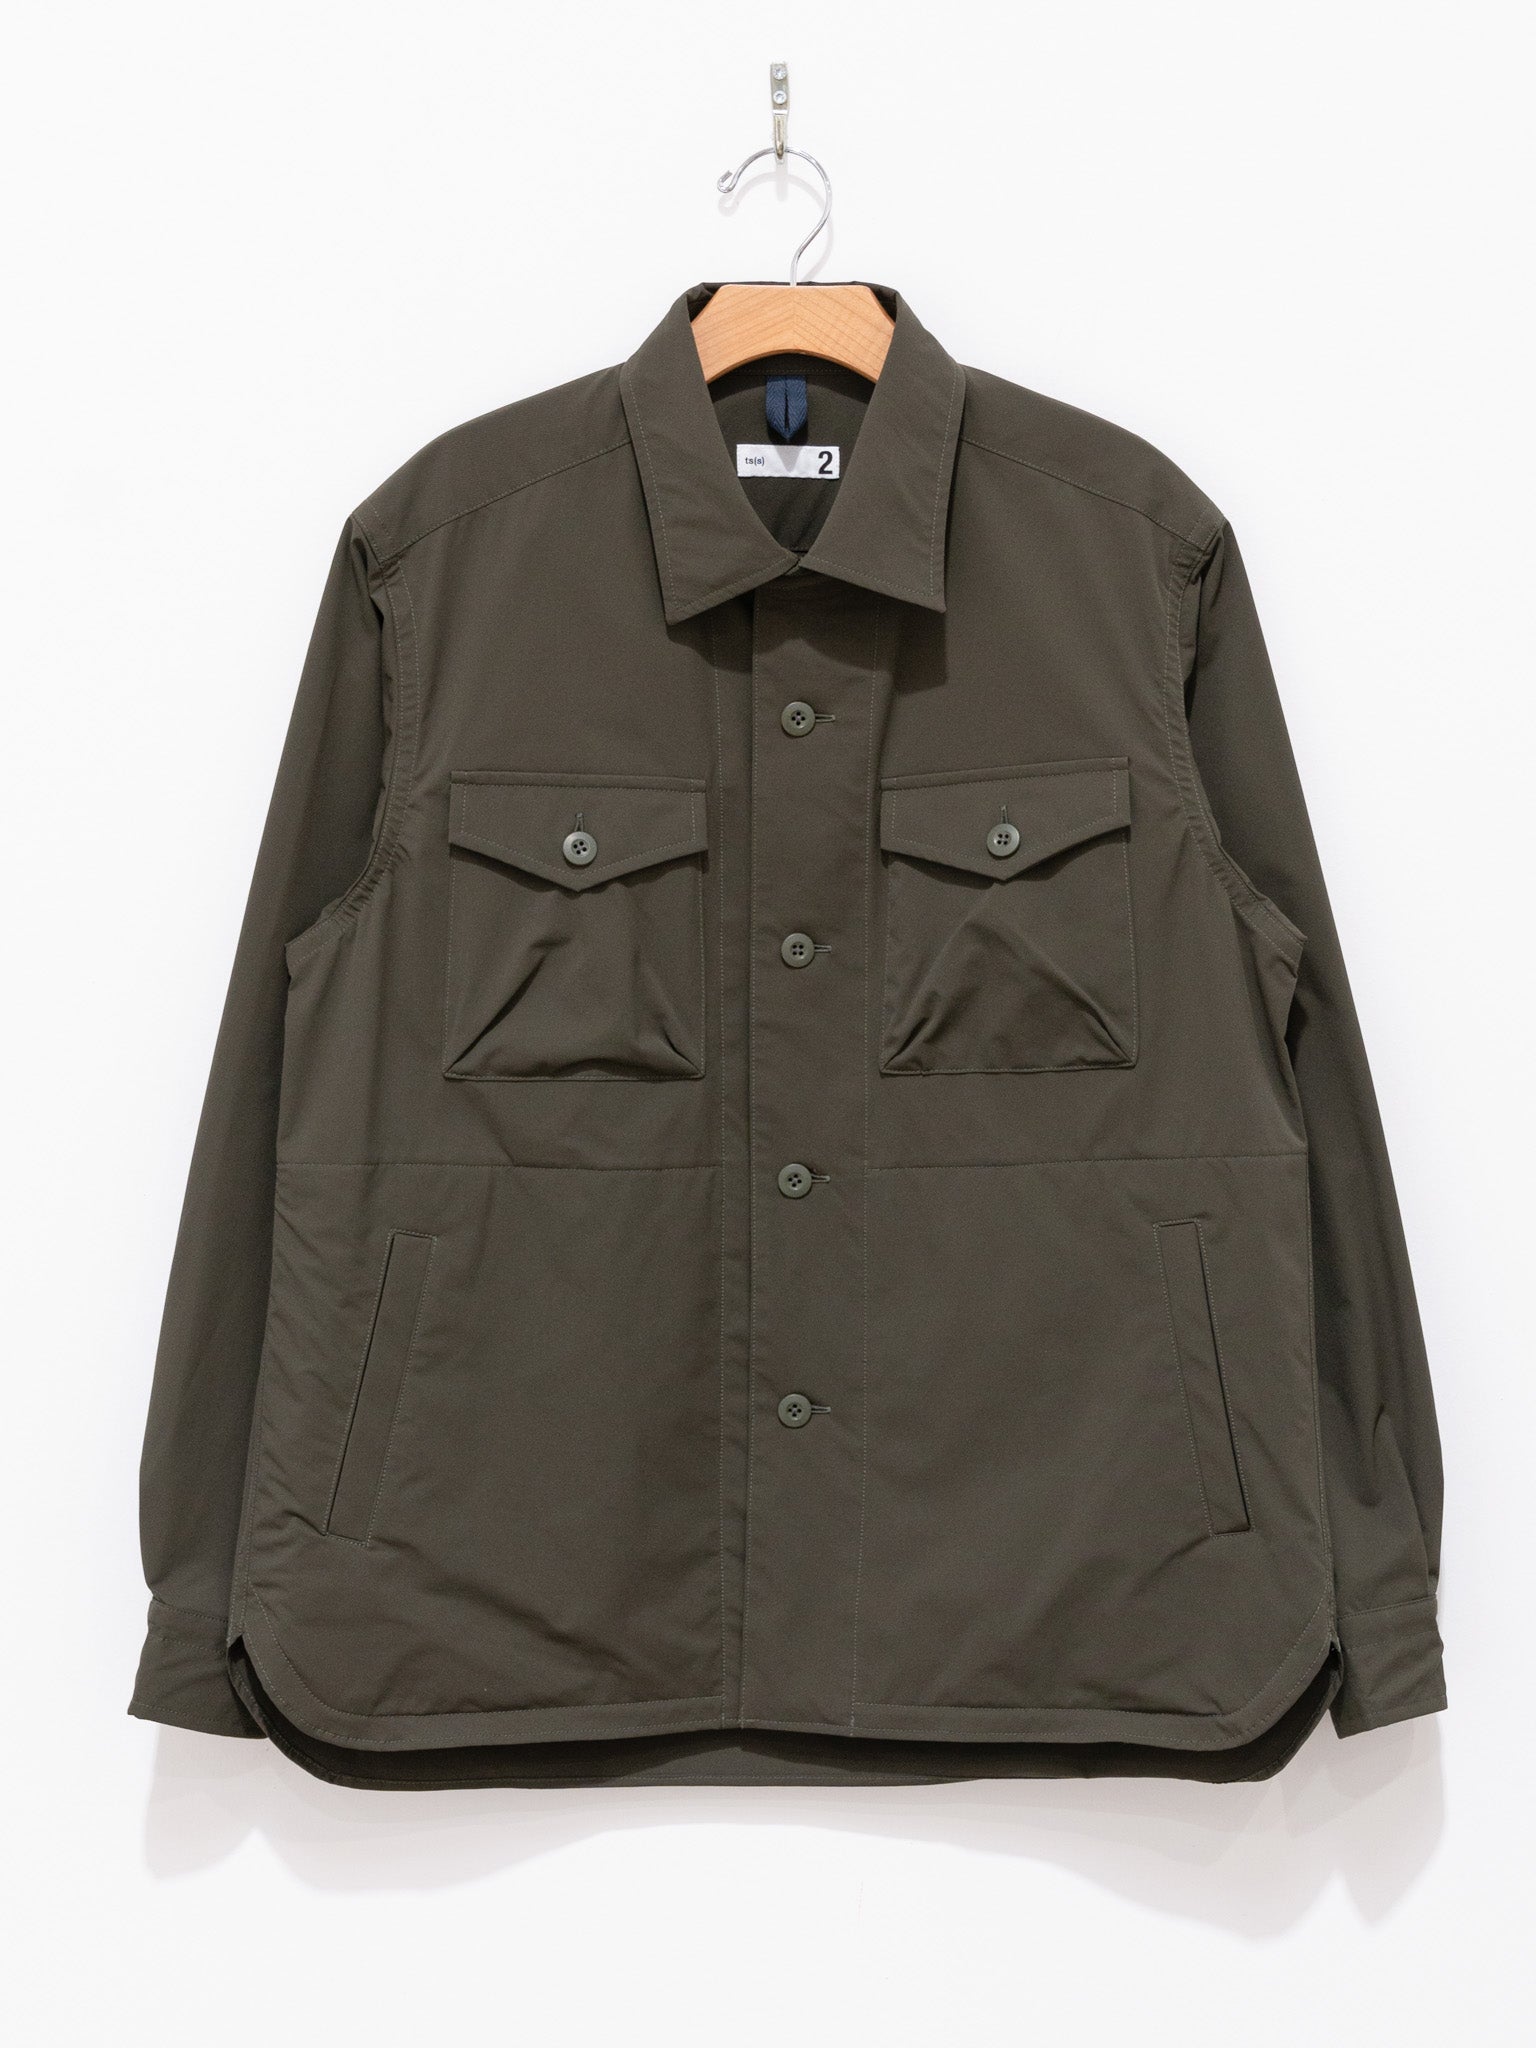 SOLOTEX Polyester Stretch CPO Shirt Jacket - Olive